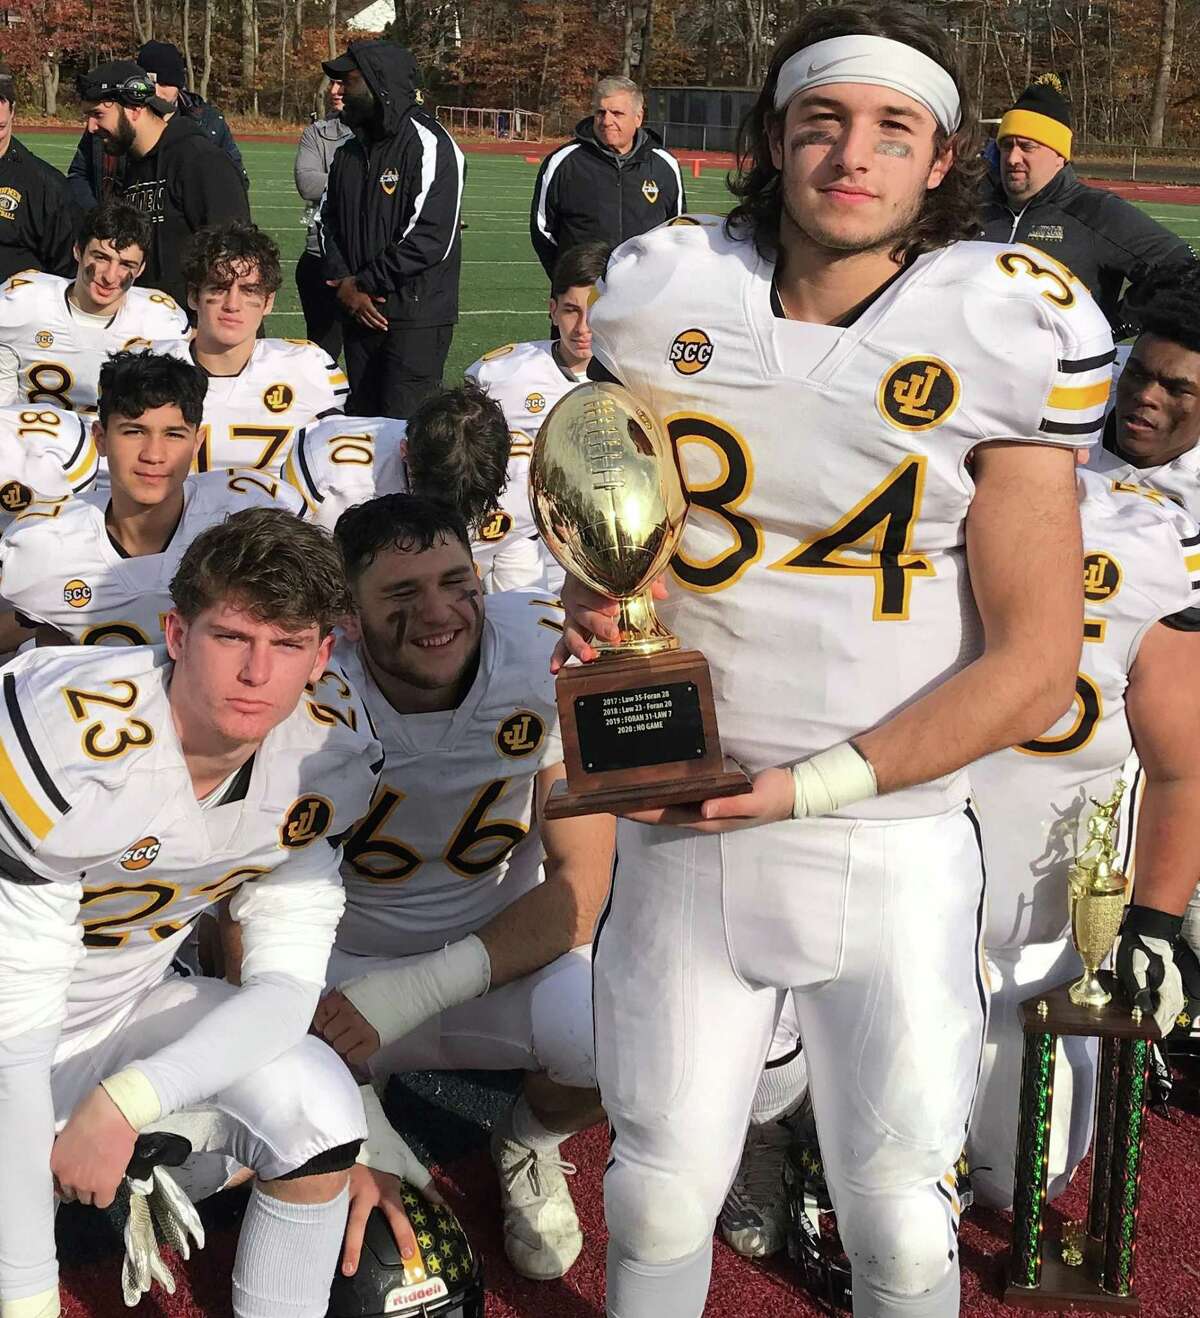 Law captain Lucas Pincus-Coyle received the Mayor's Trophy after the Lawmen defeated Foran 21-14.